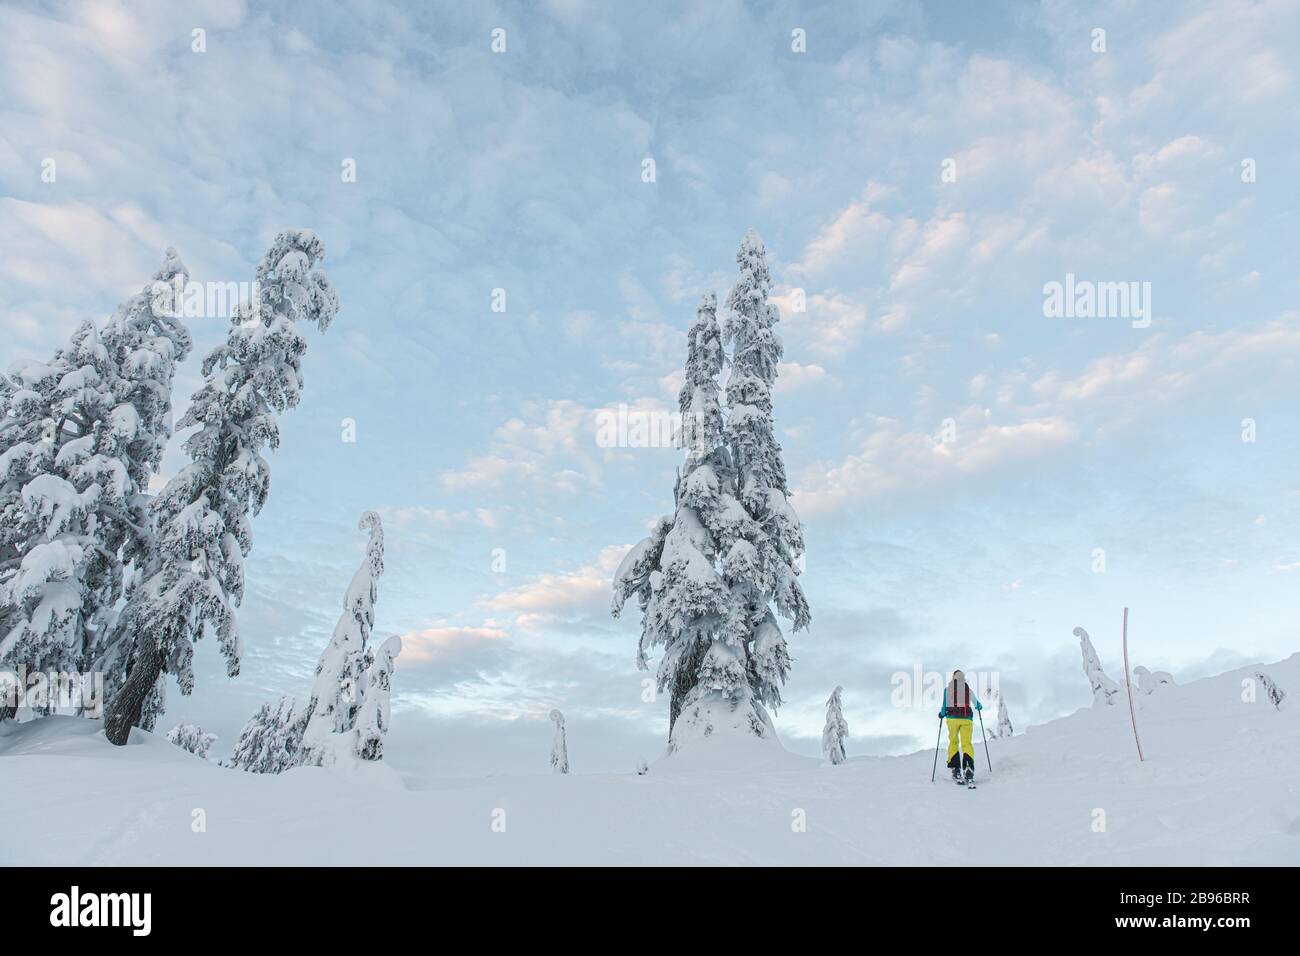 Rear view of person skiing through a wintry landscape. Stock Photo